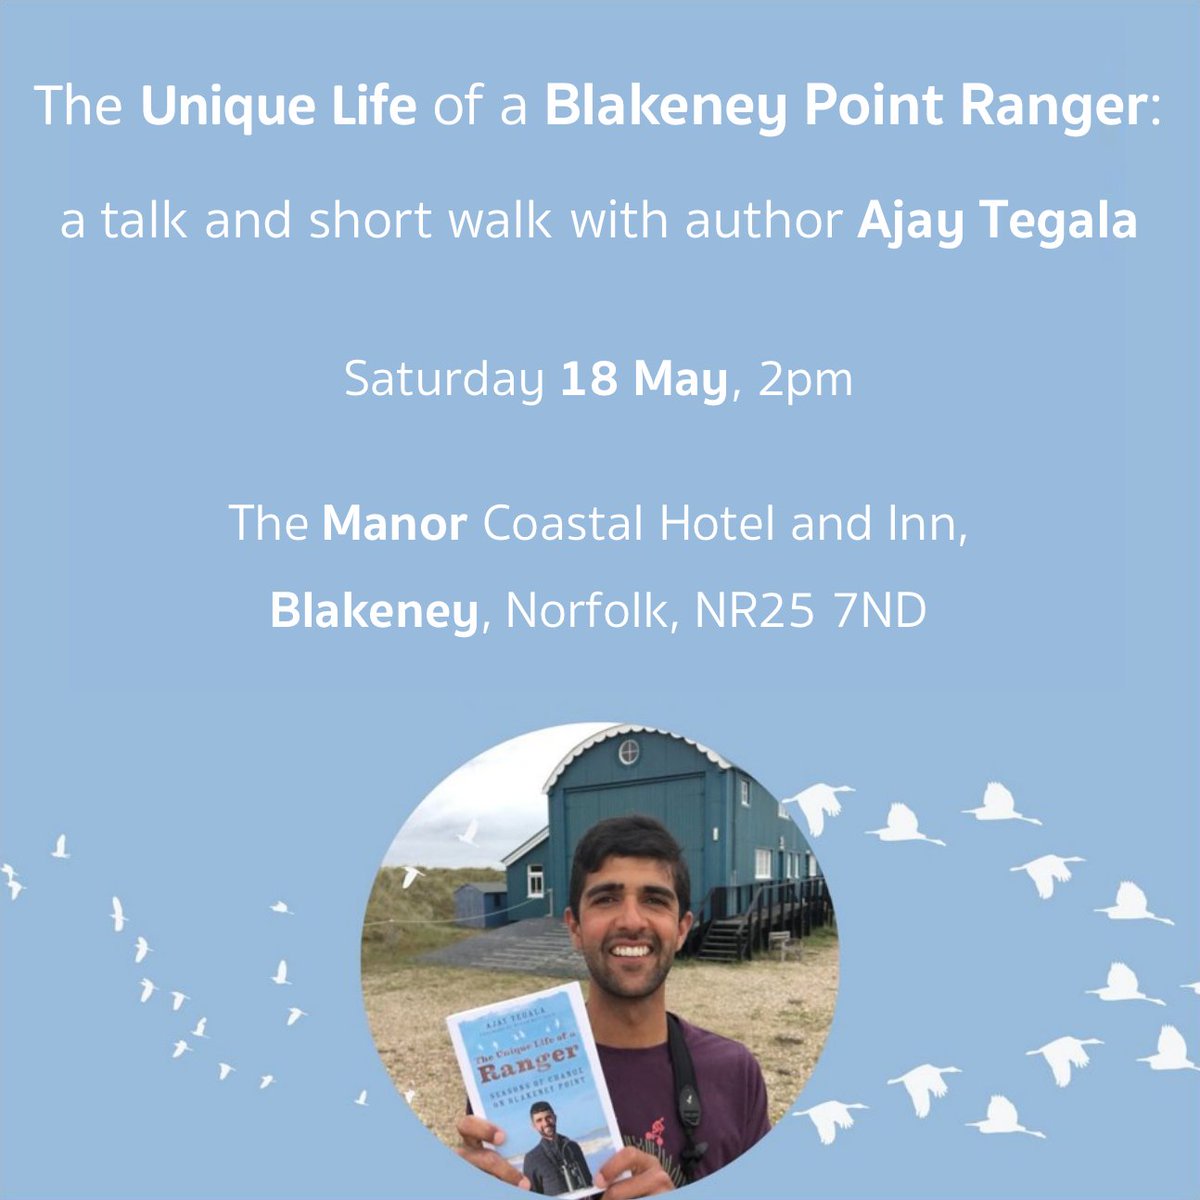 After a couple of weeks launching Wetland Diaries, I'm heading back to Blakeney to chat around my first book, all about #wildlife and ranger life on #BlakeneyPoint, #Norfolk 📘 Join me for a free talk and optional short walk, no booking necessary